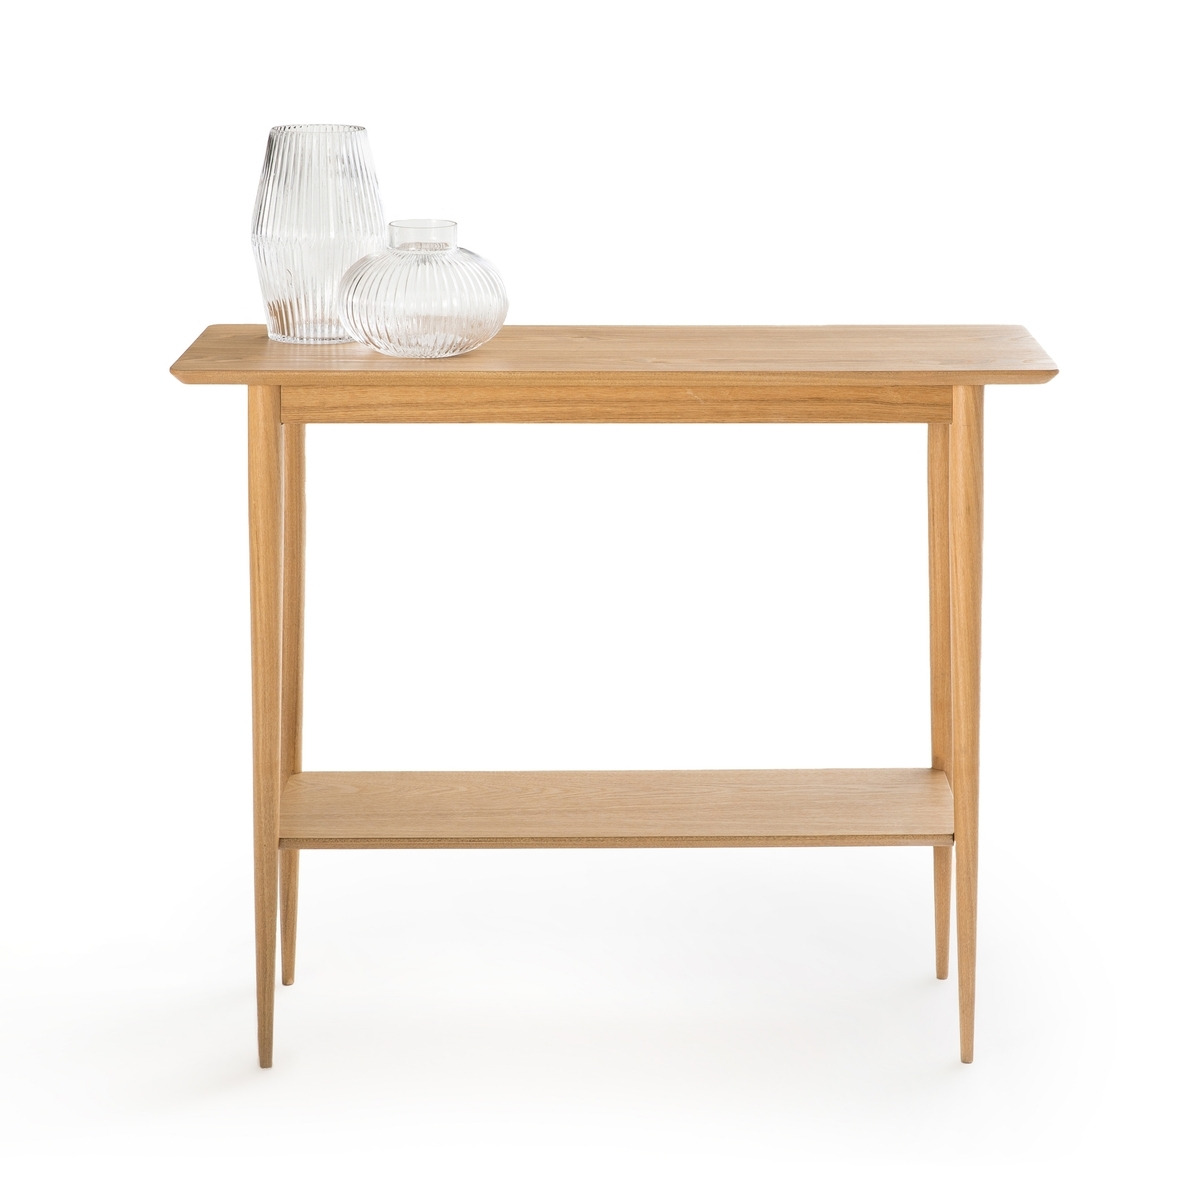 Lussan Double Top Ash Console Table - image 1